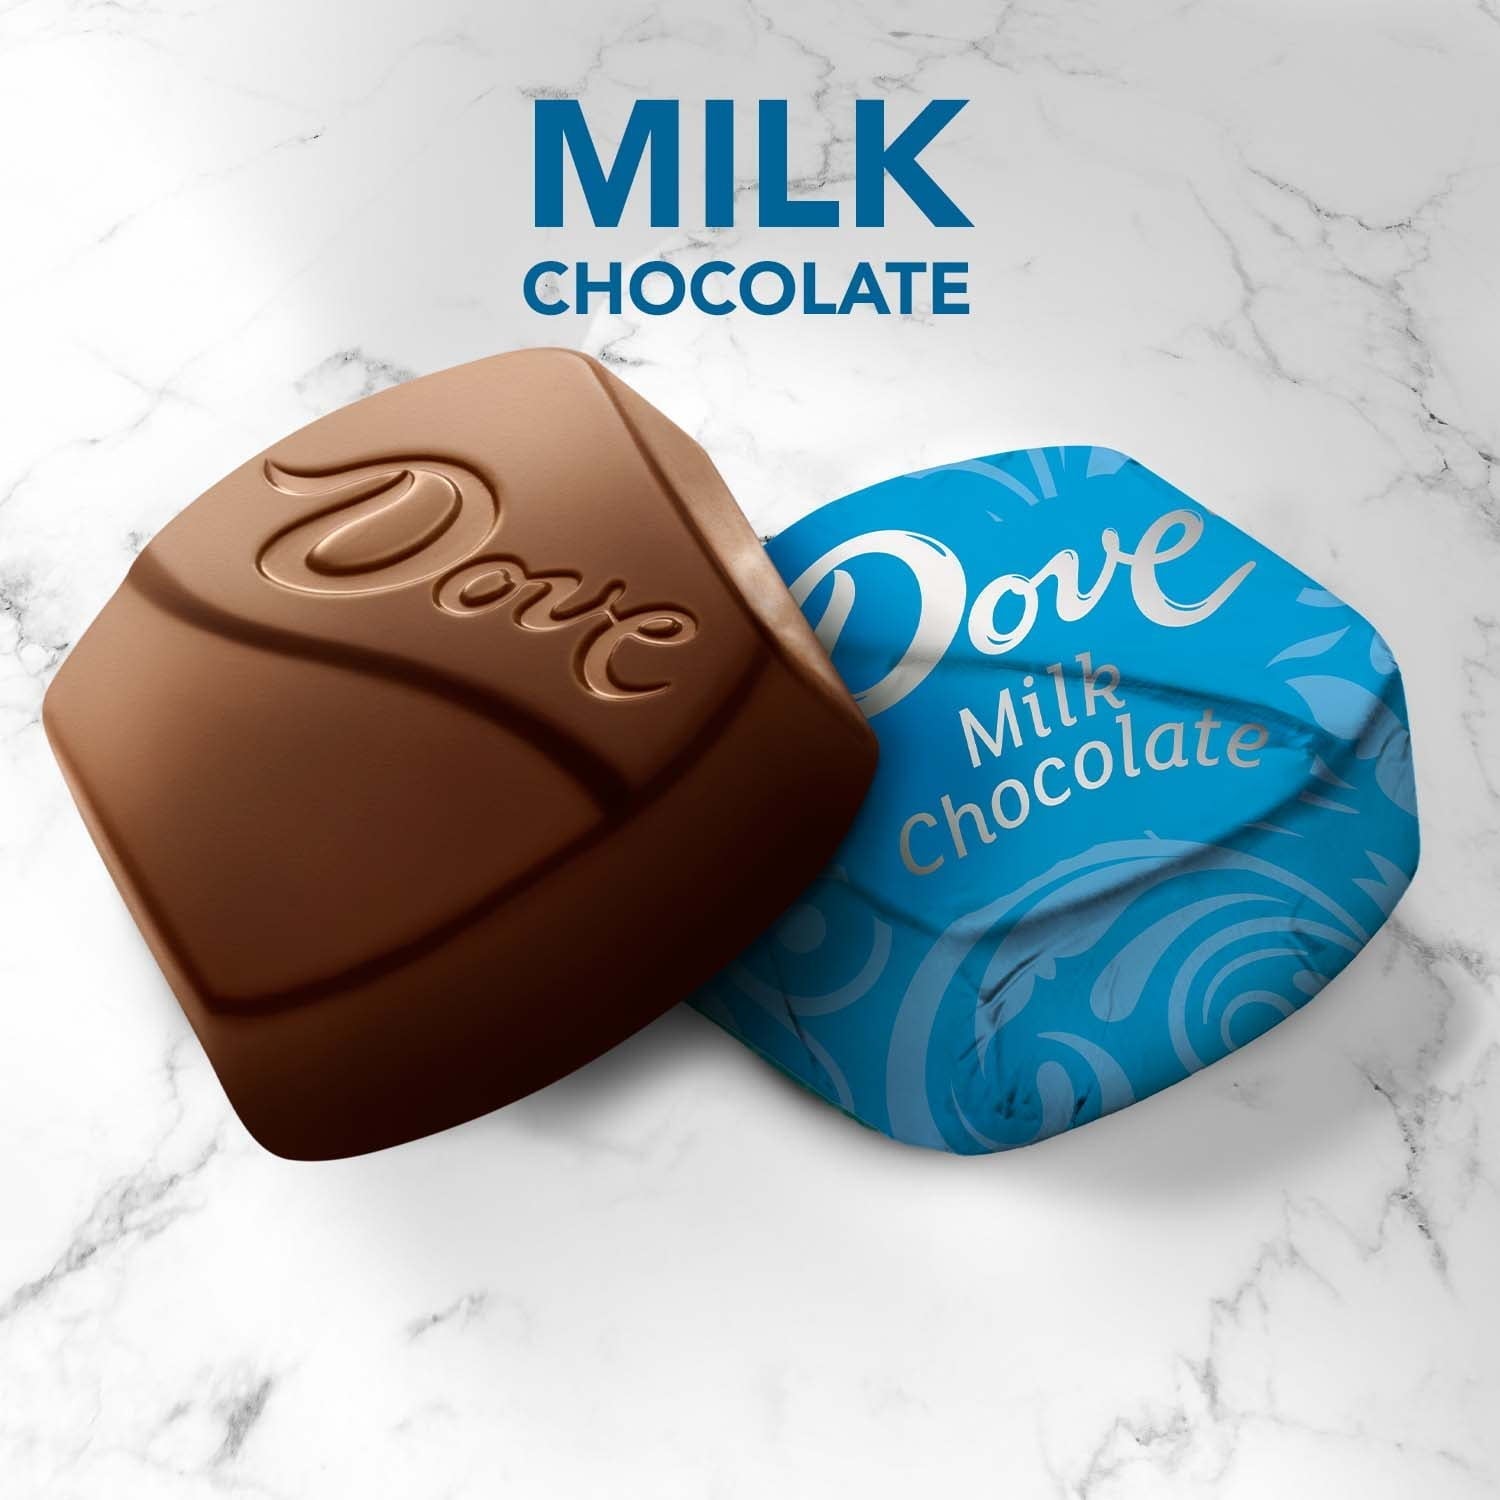 Wholesale prices with free shipping all over United States DOVE PROMISES Milk Chocolate Self Care Candy, 8.46 oz Bag - Steven Deals